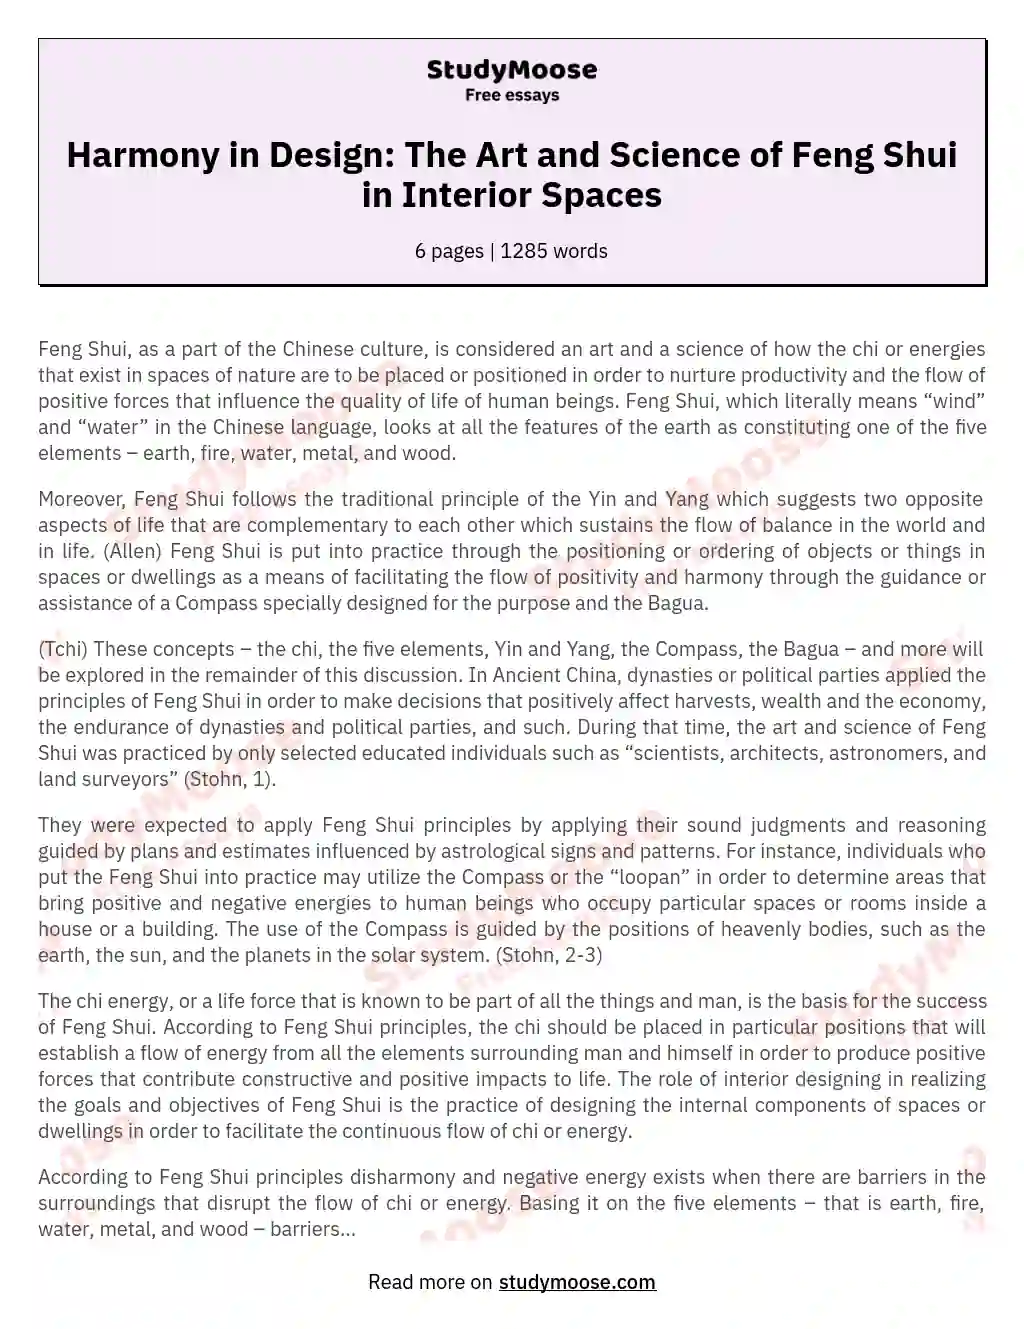 Harmony in Design: The Art and Science of Feng Shui in Interior Spaces essay